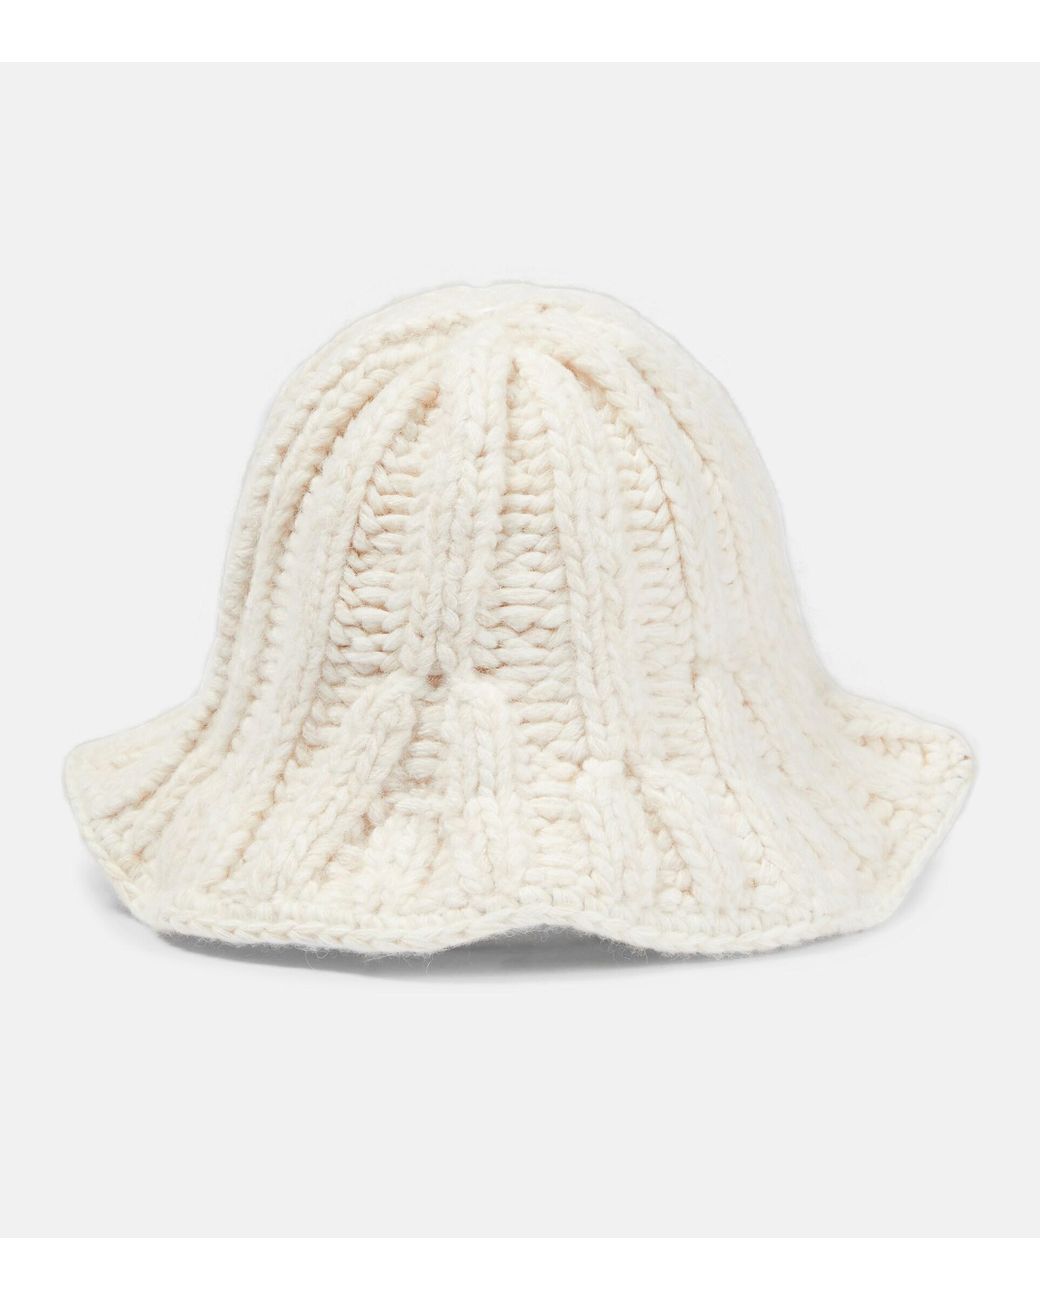 MM6 by Maison Martin Margiela Knit Bucket Hat in Natural | Lyst